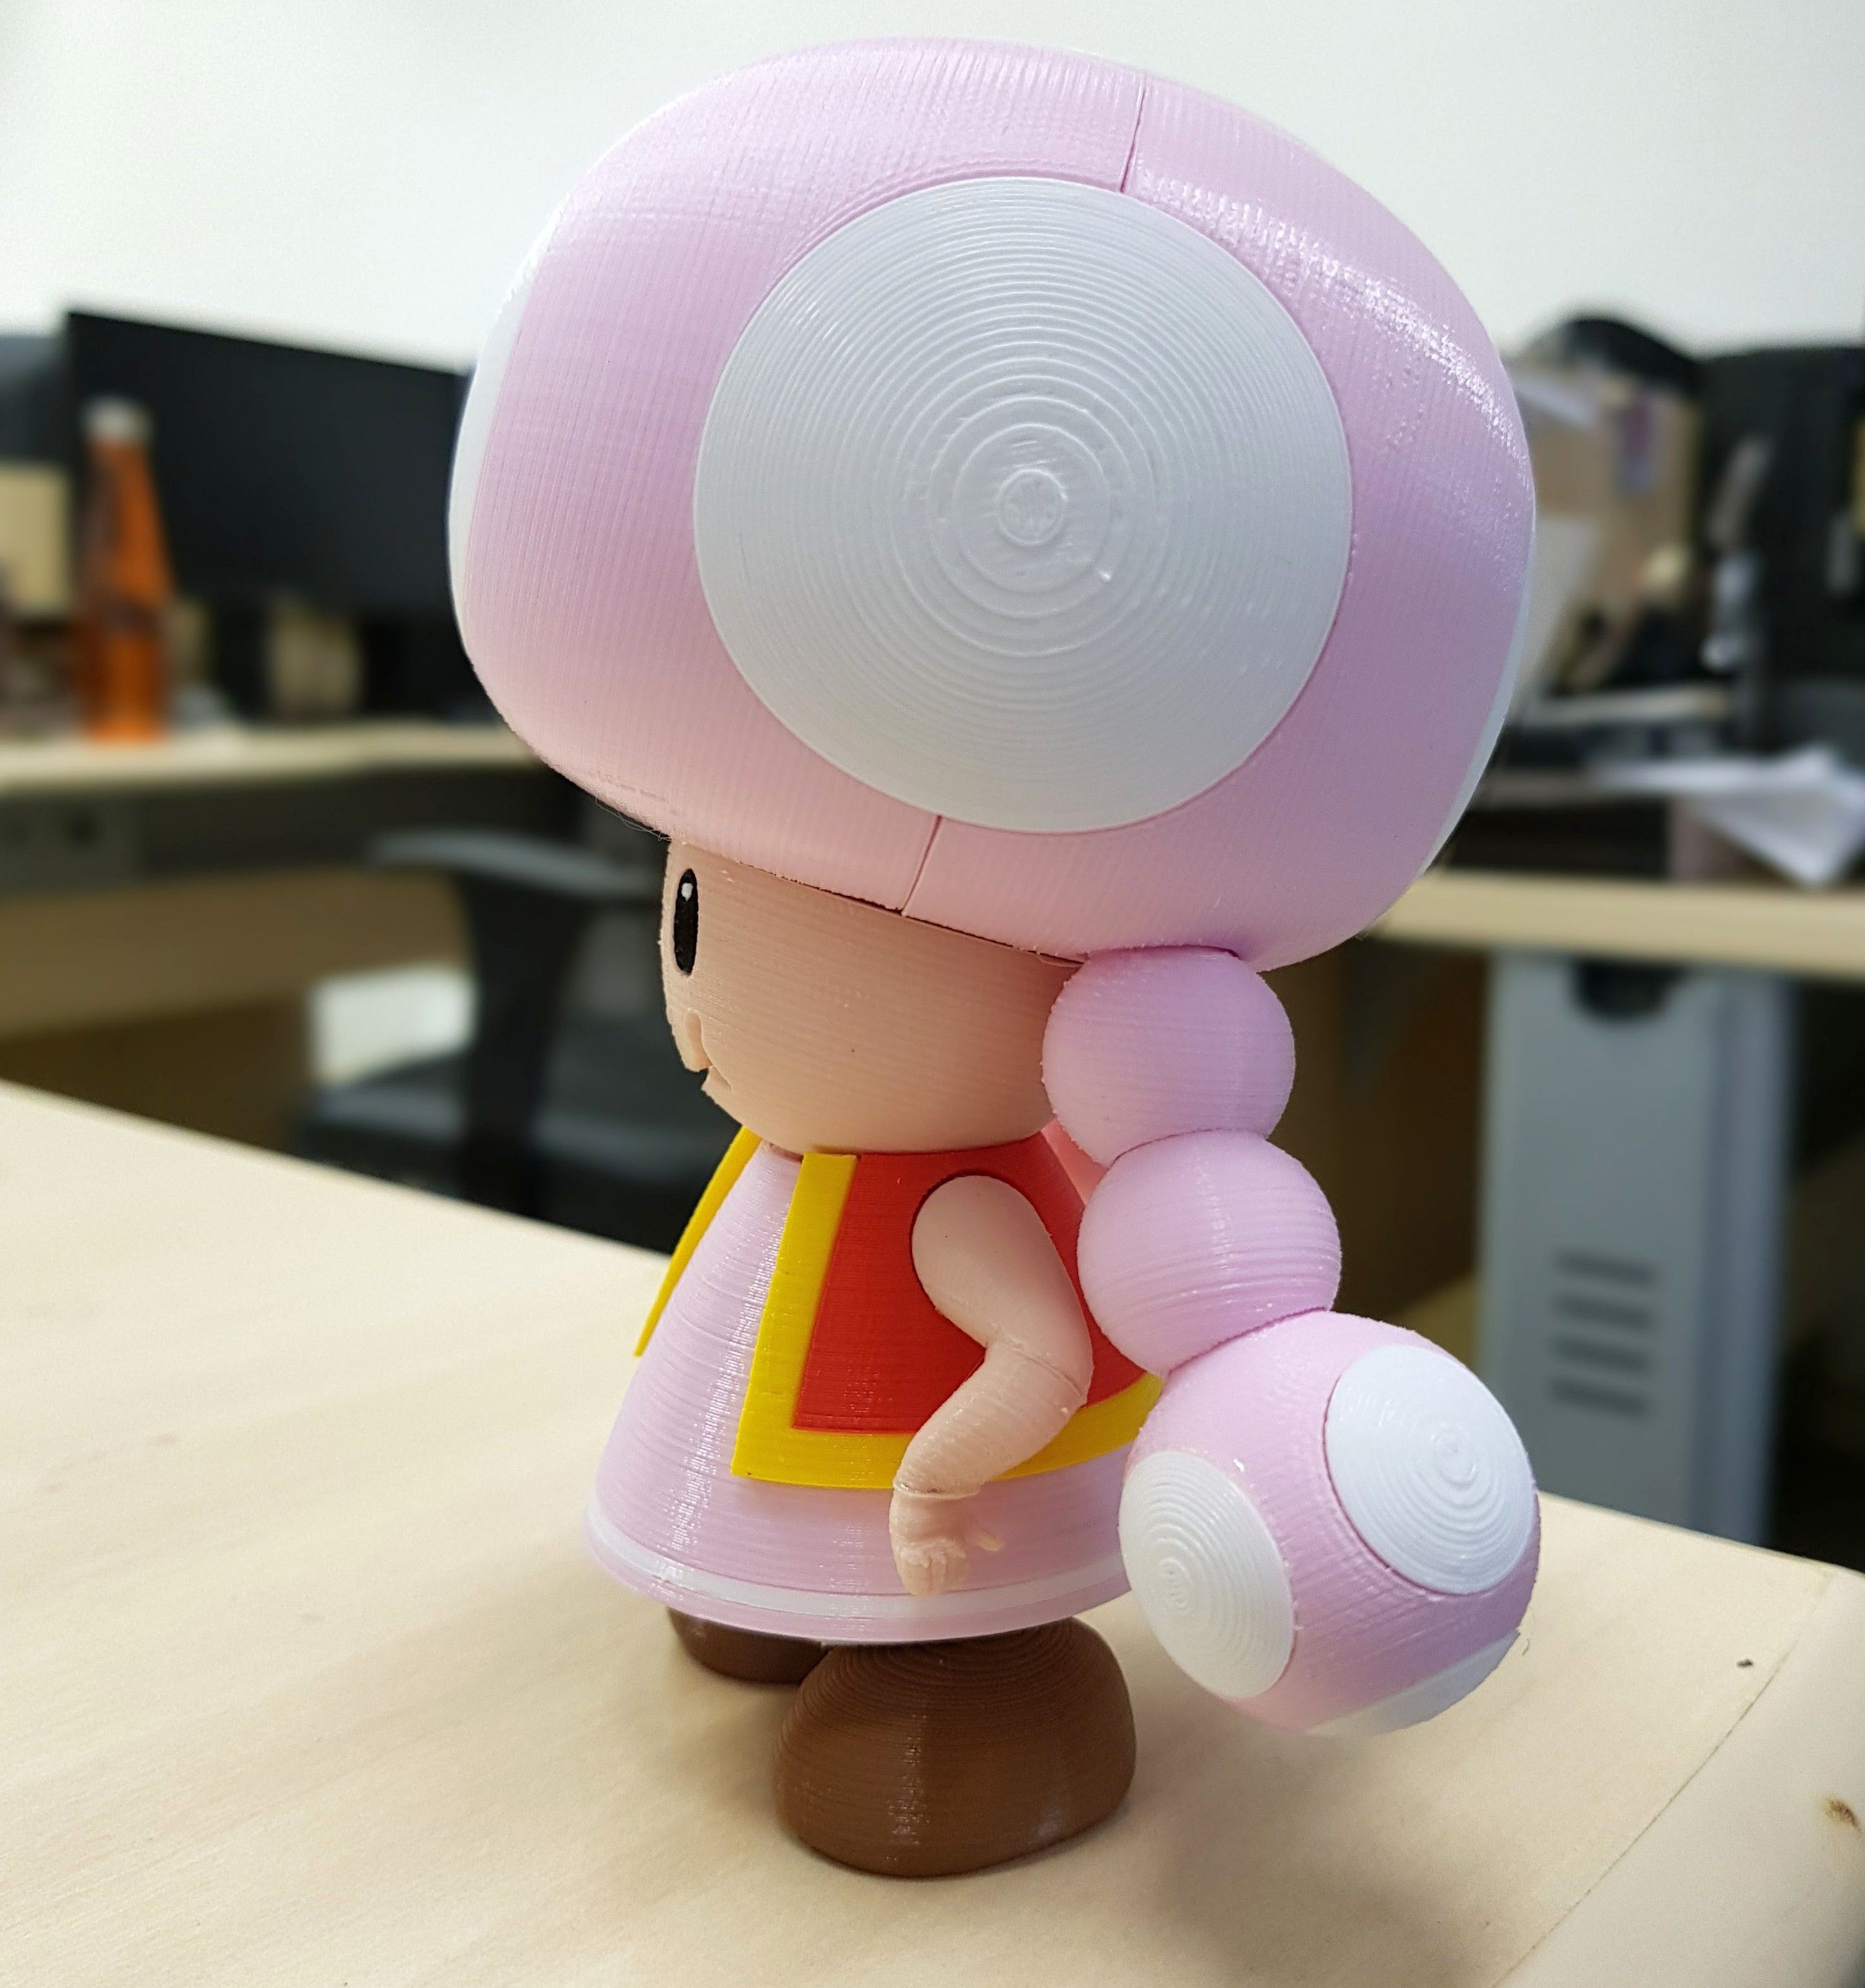 02.jpg Download free STL file Toadette from Mario games - Multi-color • 3D print object, bpitanga